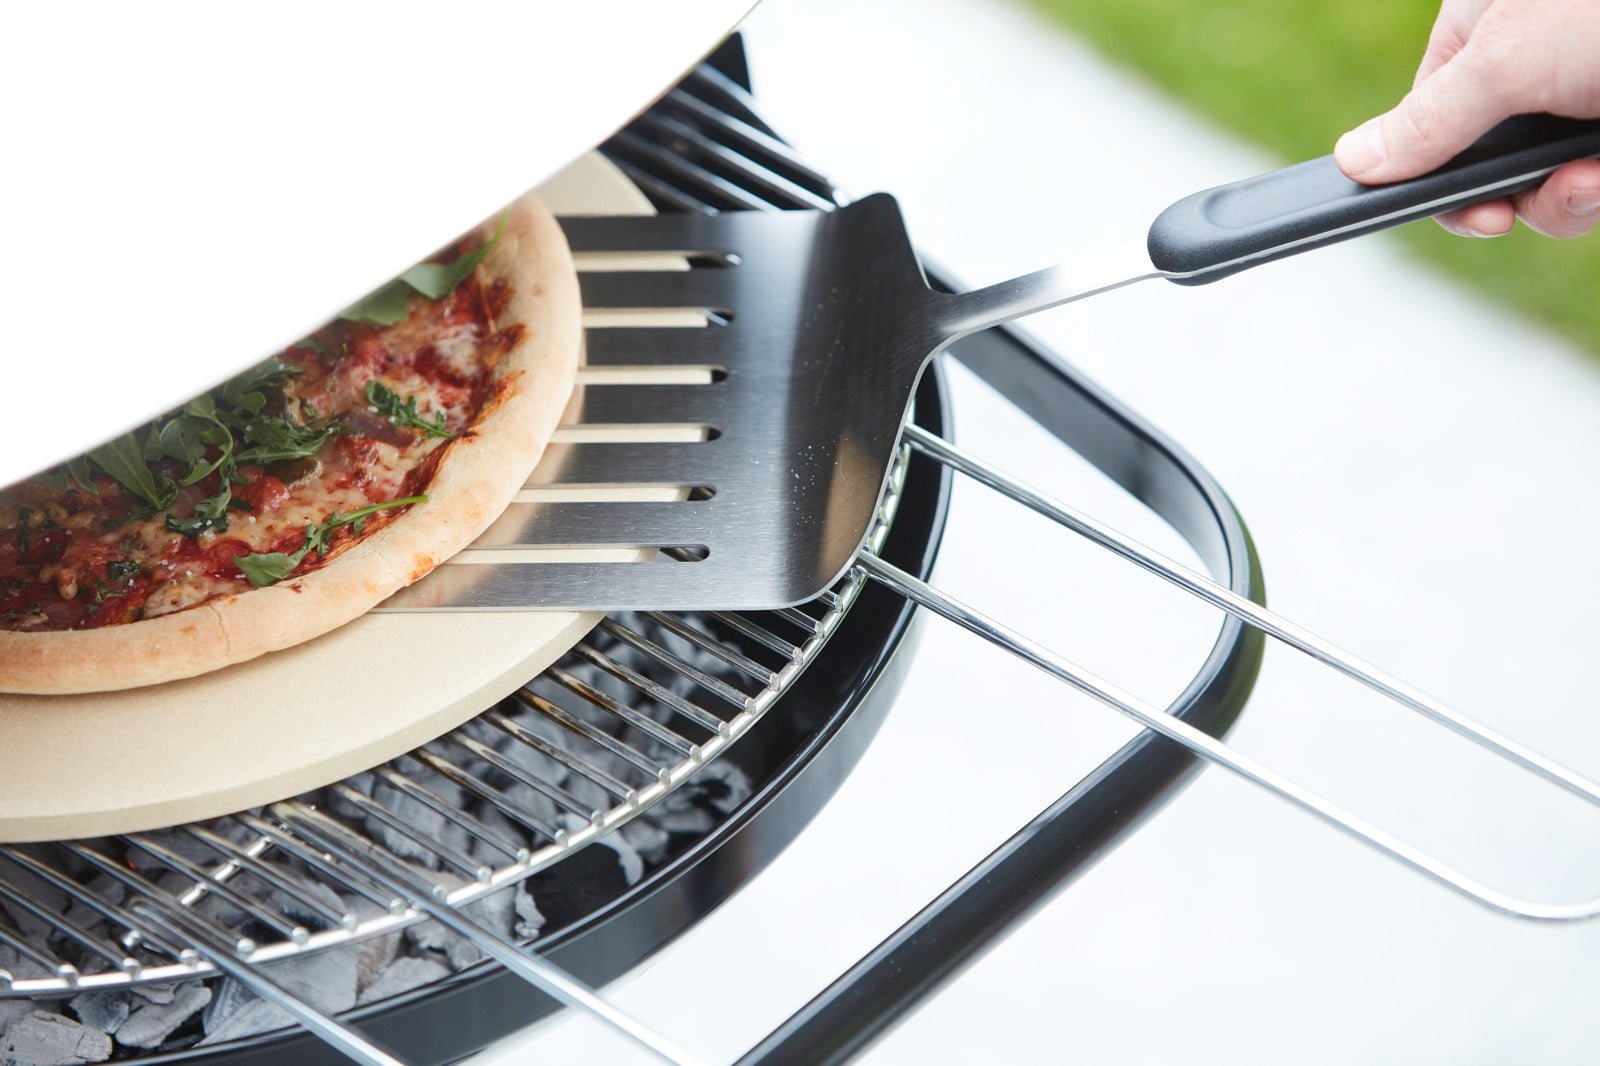 Explore Barbecook's countless barbecue accessories